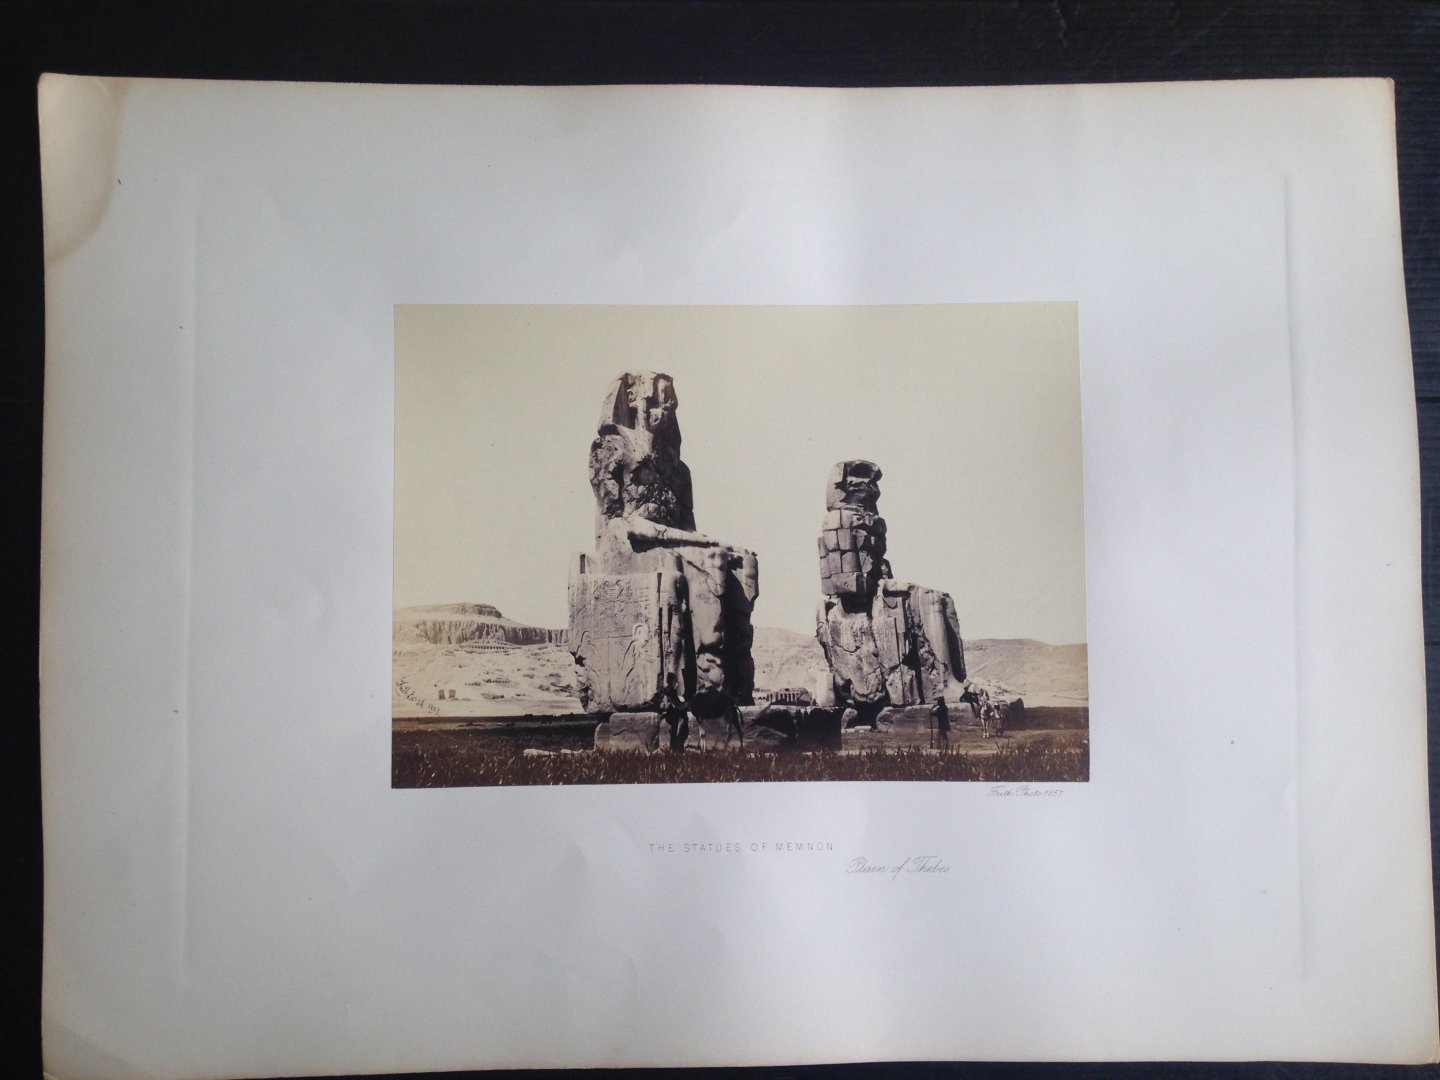 Frith, Francis - The Statues of Memnon, Plain of Thebes, Series Egypt and Palestine